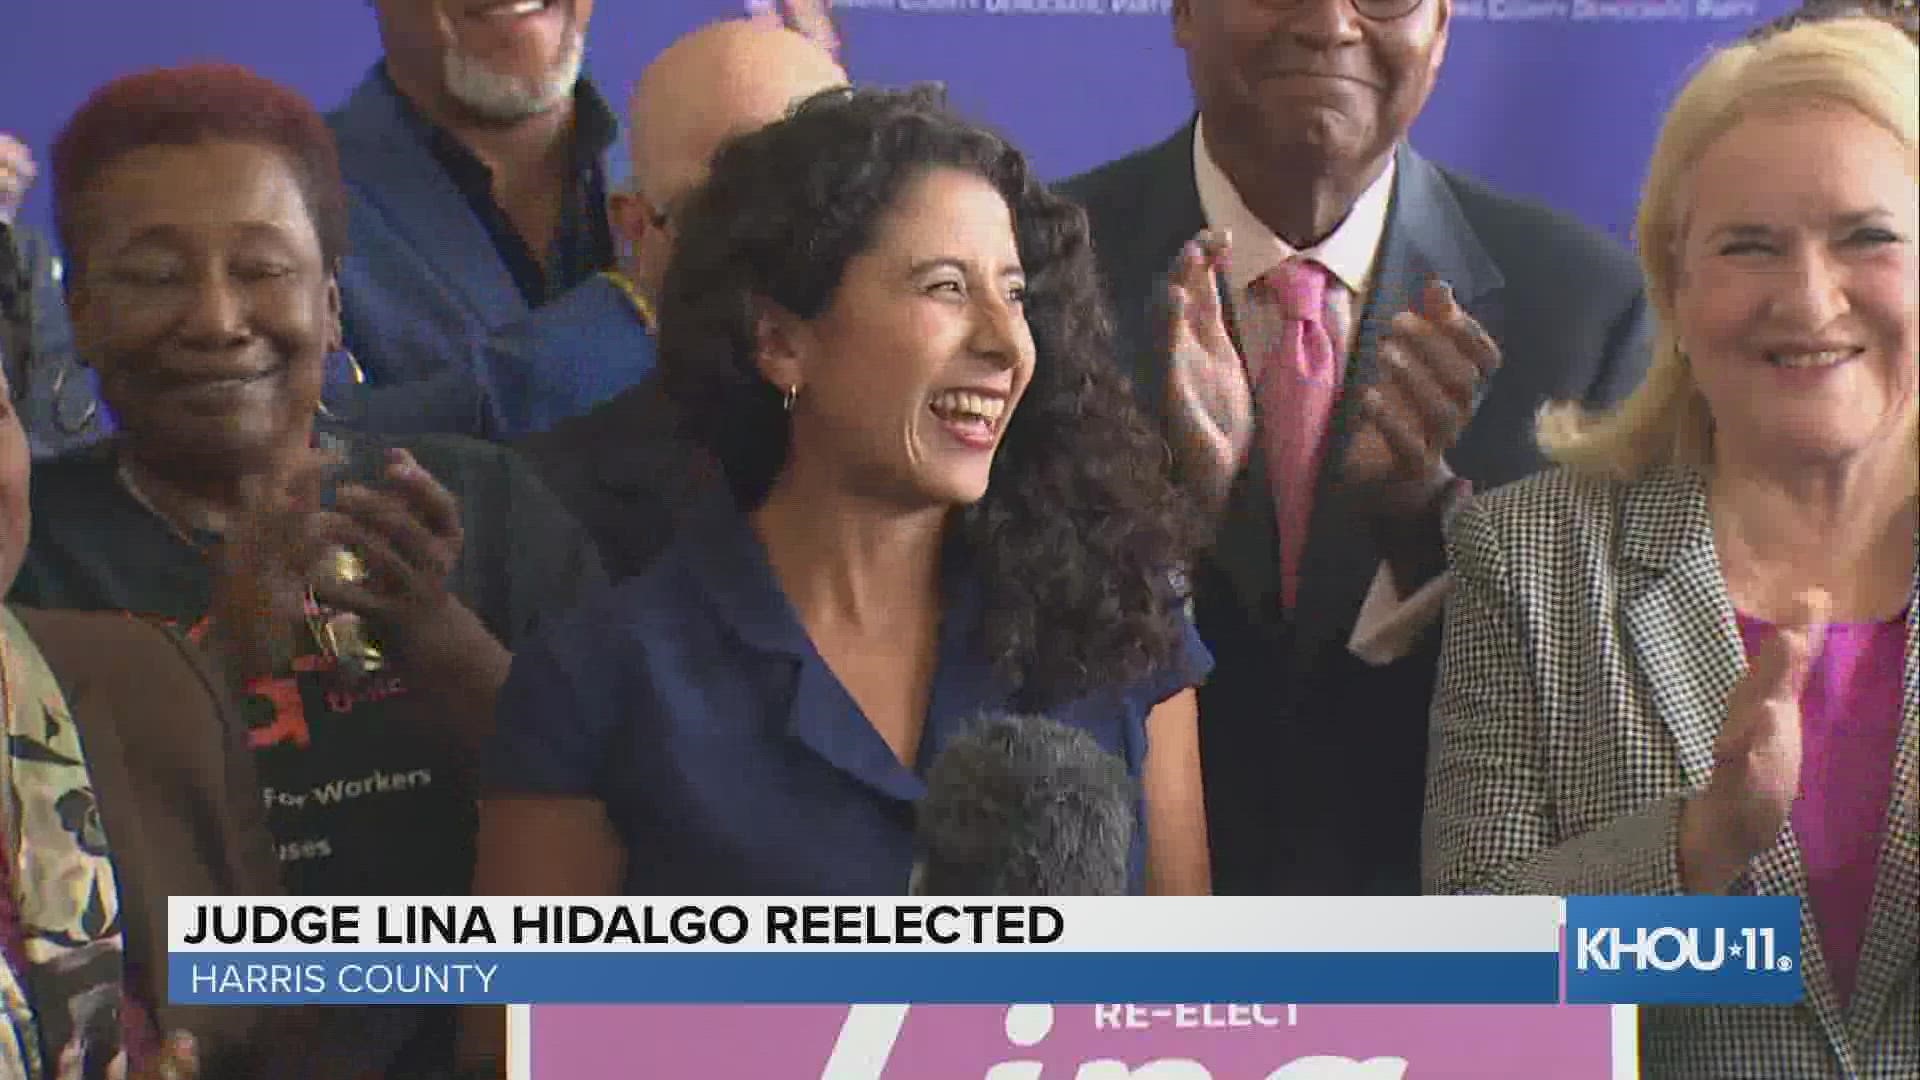 Lina Hidalgo was reelected as Harris County judge after a tight race against Alexandra Mealer. She called the win a "sweet victory."